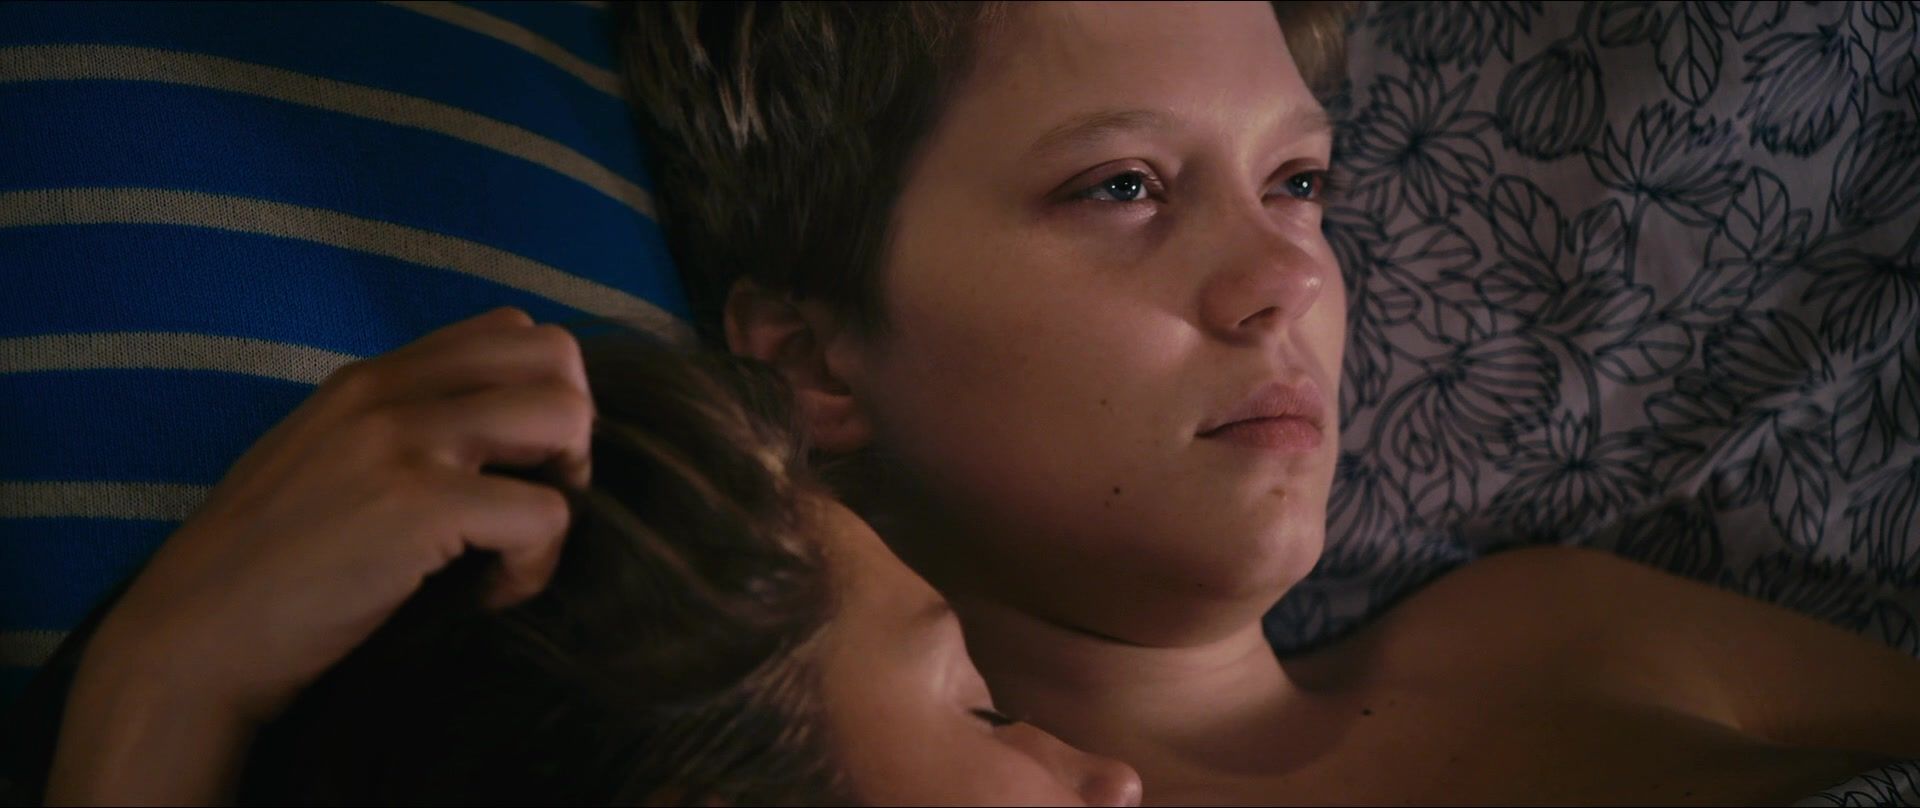 Doctor Best lesbian scene in movies | Adele Exarchopoulos nude & Léa Seydoux naked | The film "Blue Is The Warmest Color" (2013) Exgf - 1